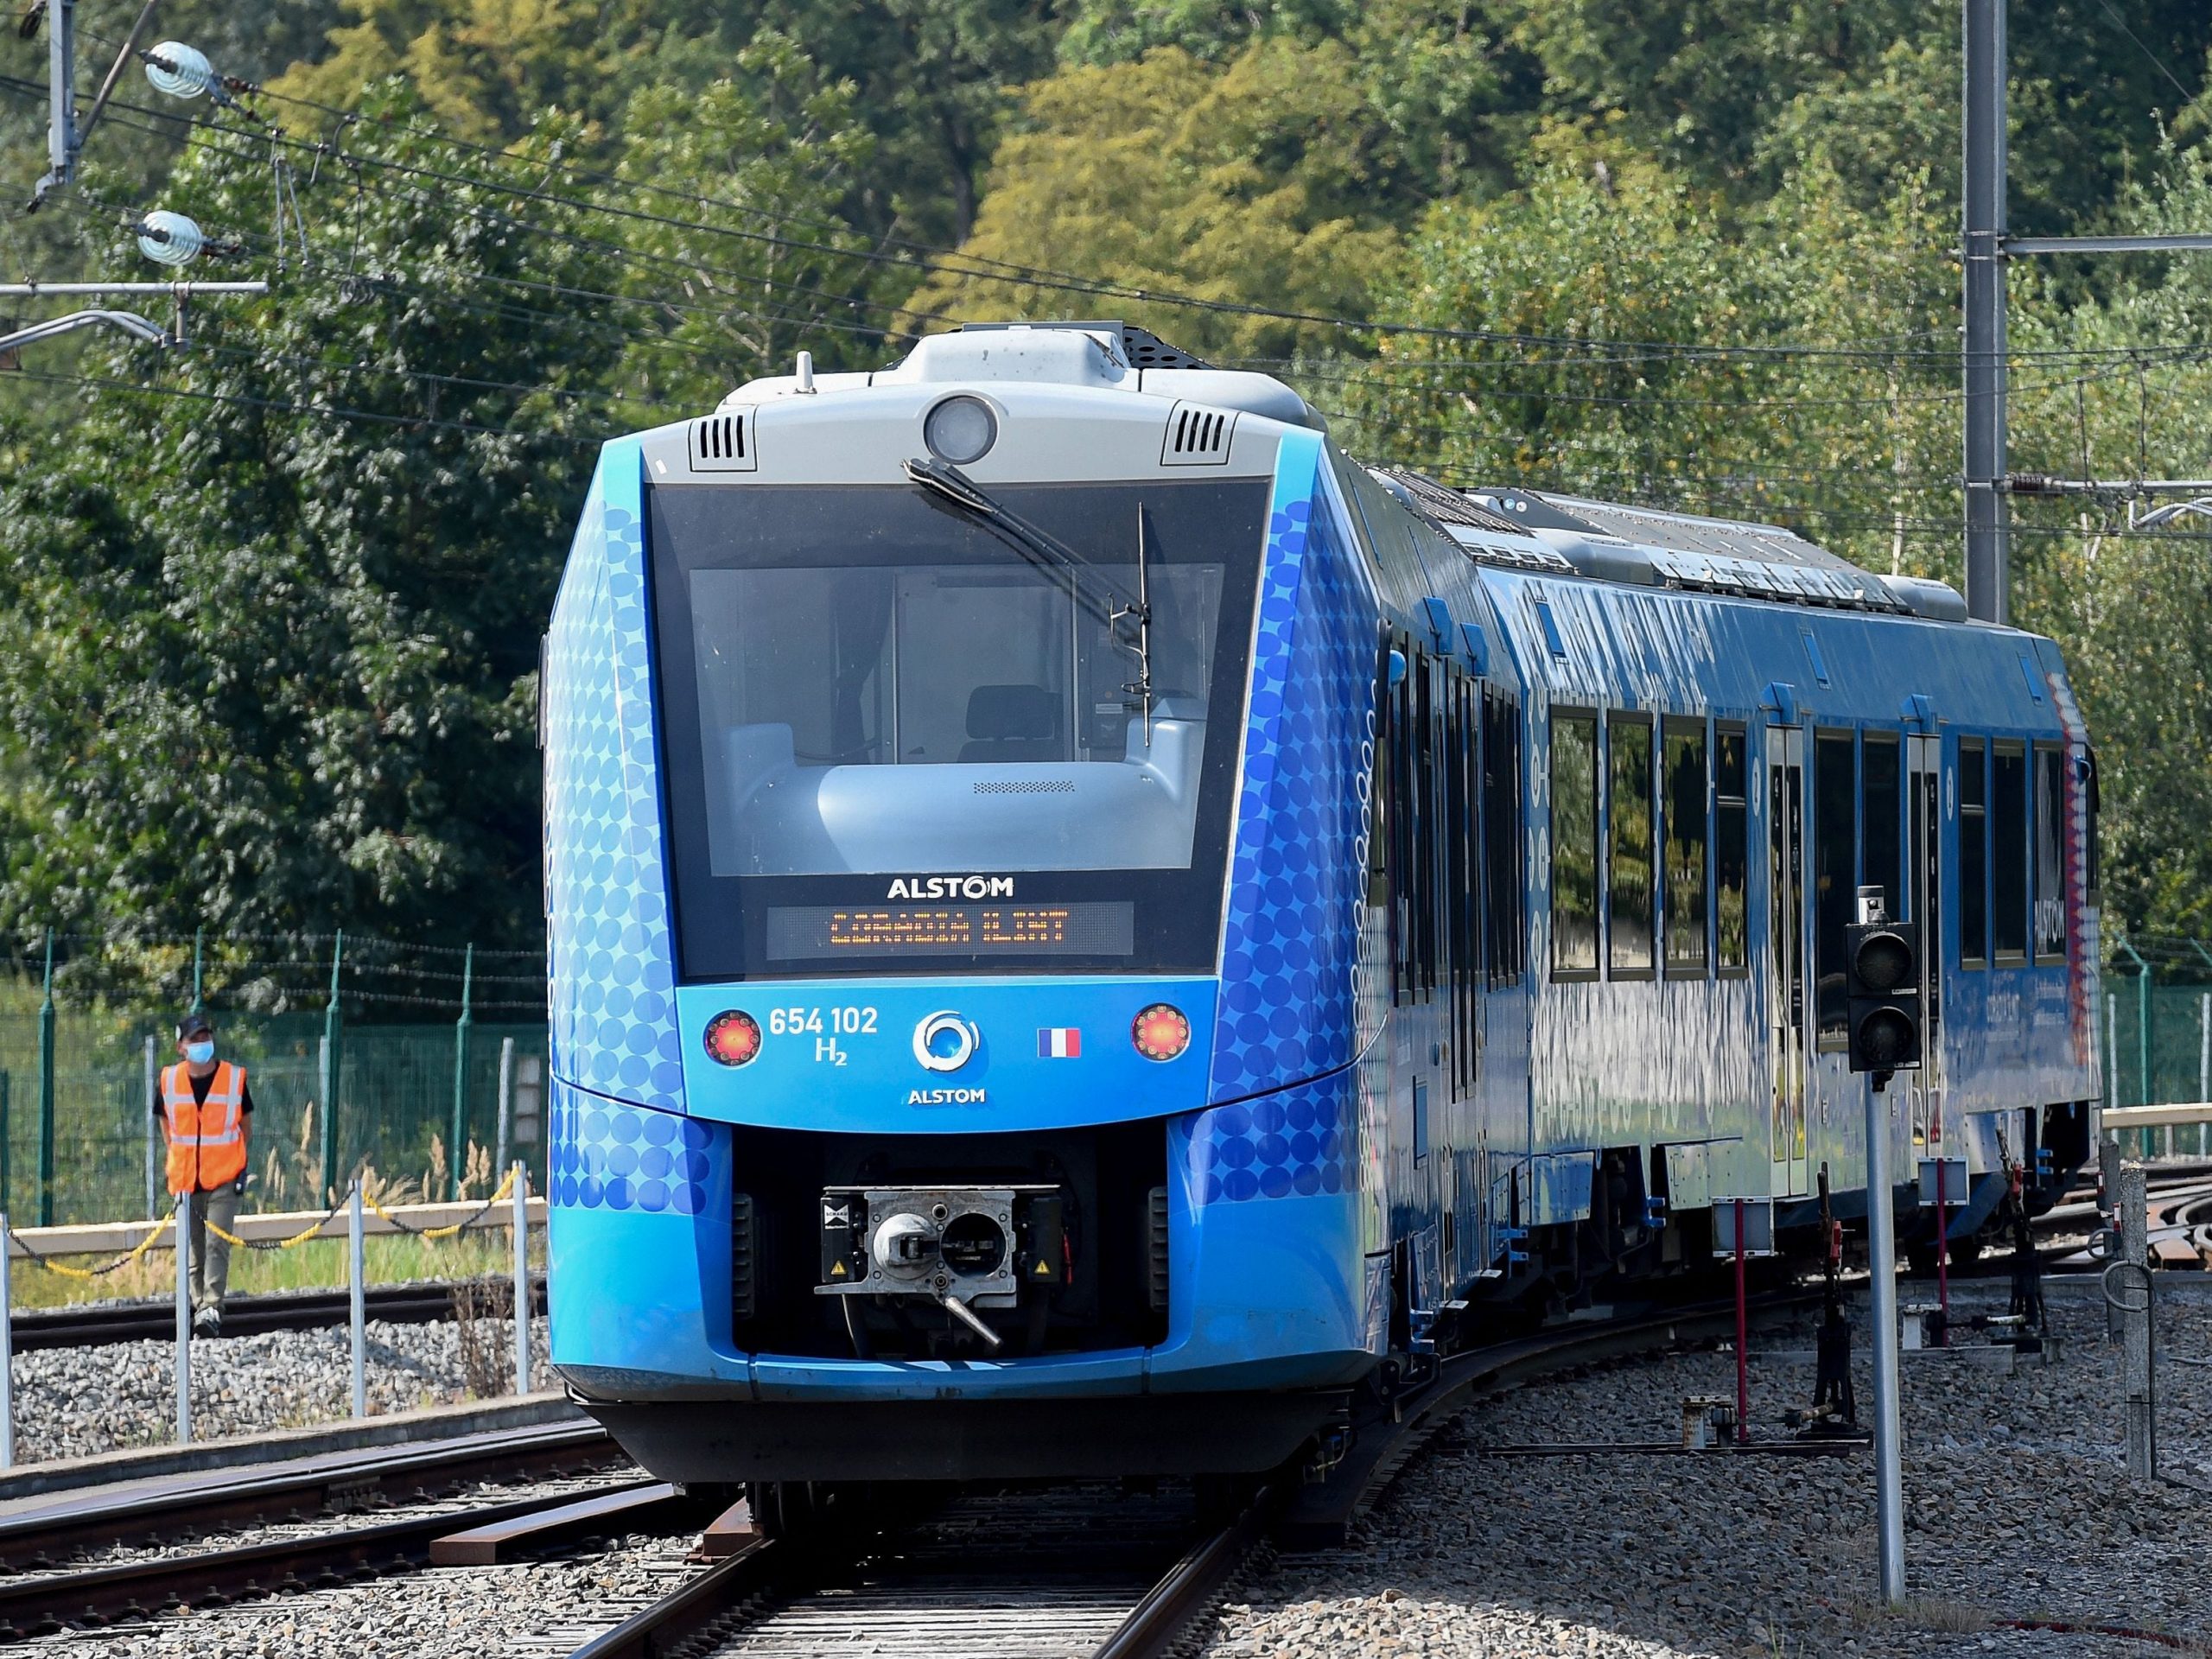 Alstom's Coradia iLint train, the first in the world to be powered by hydrogen